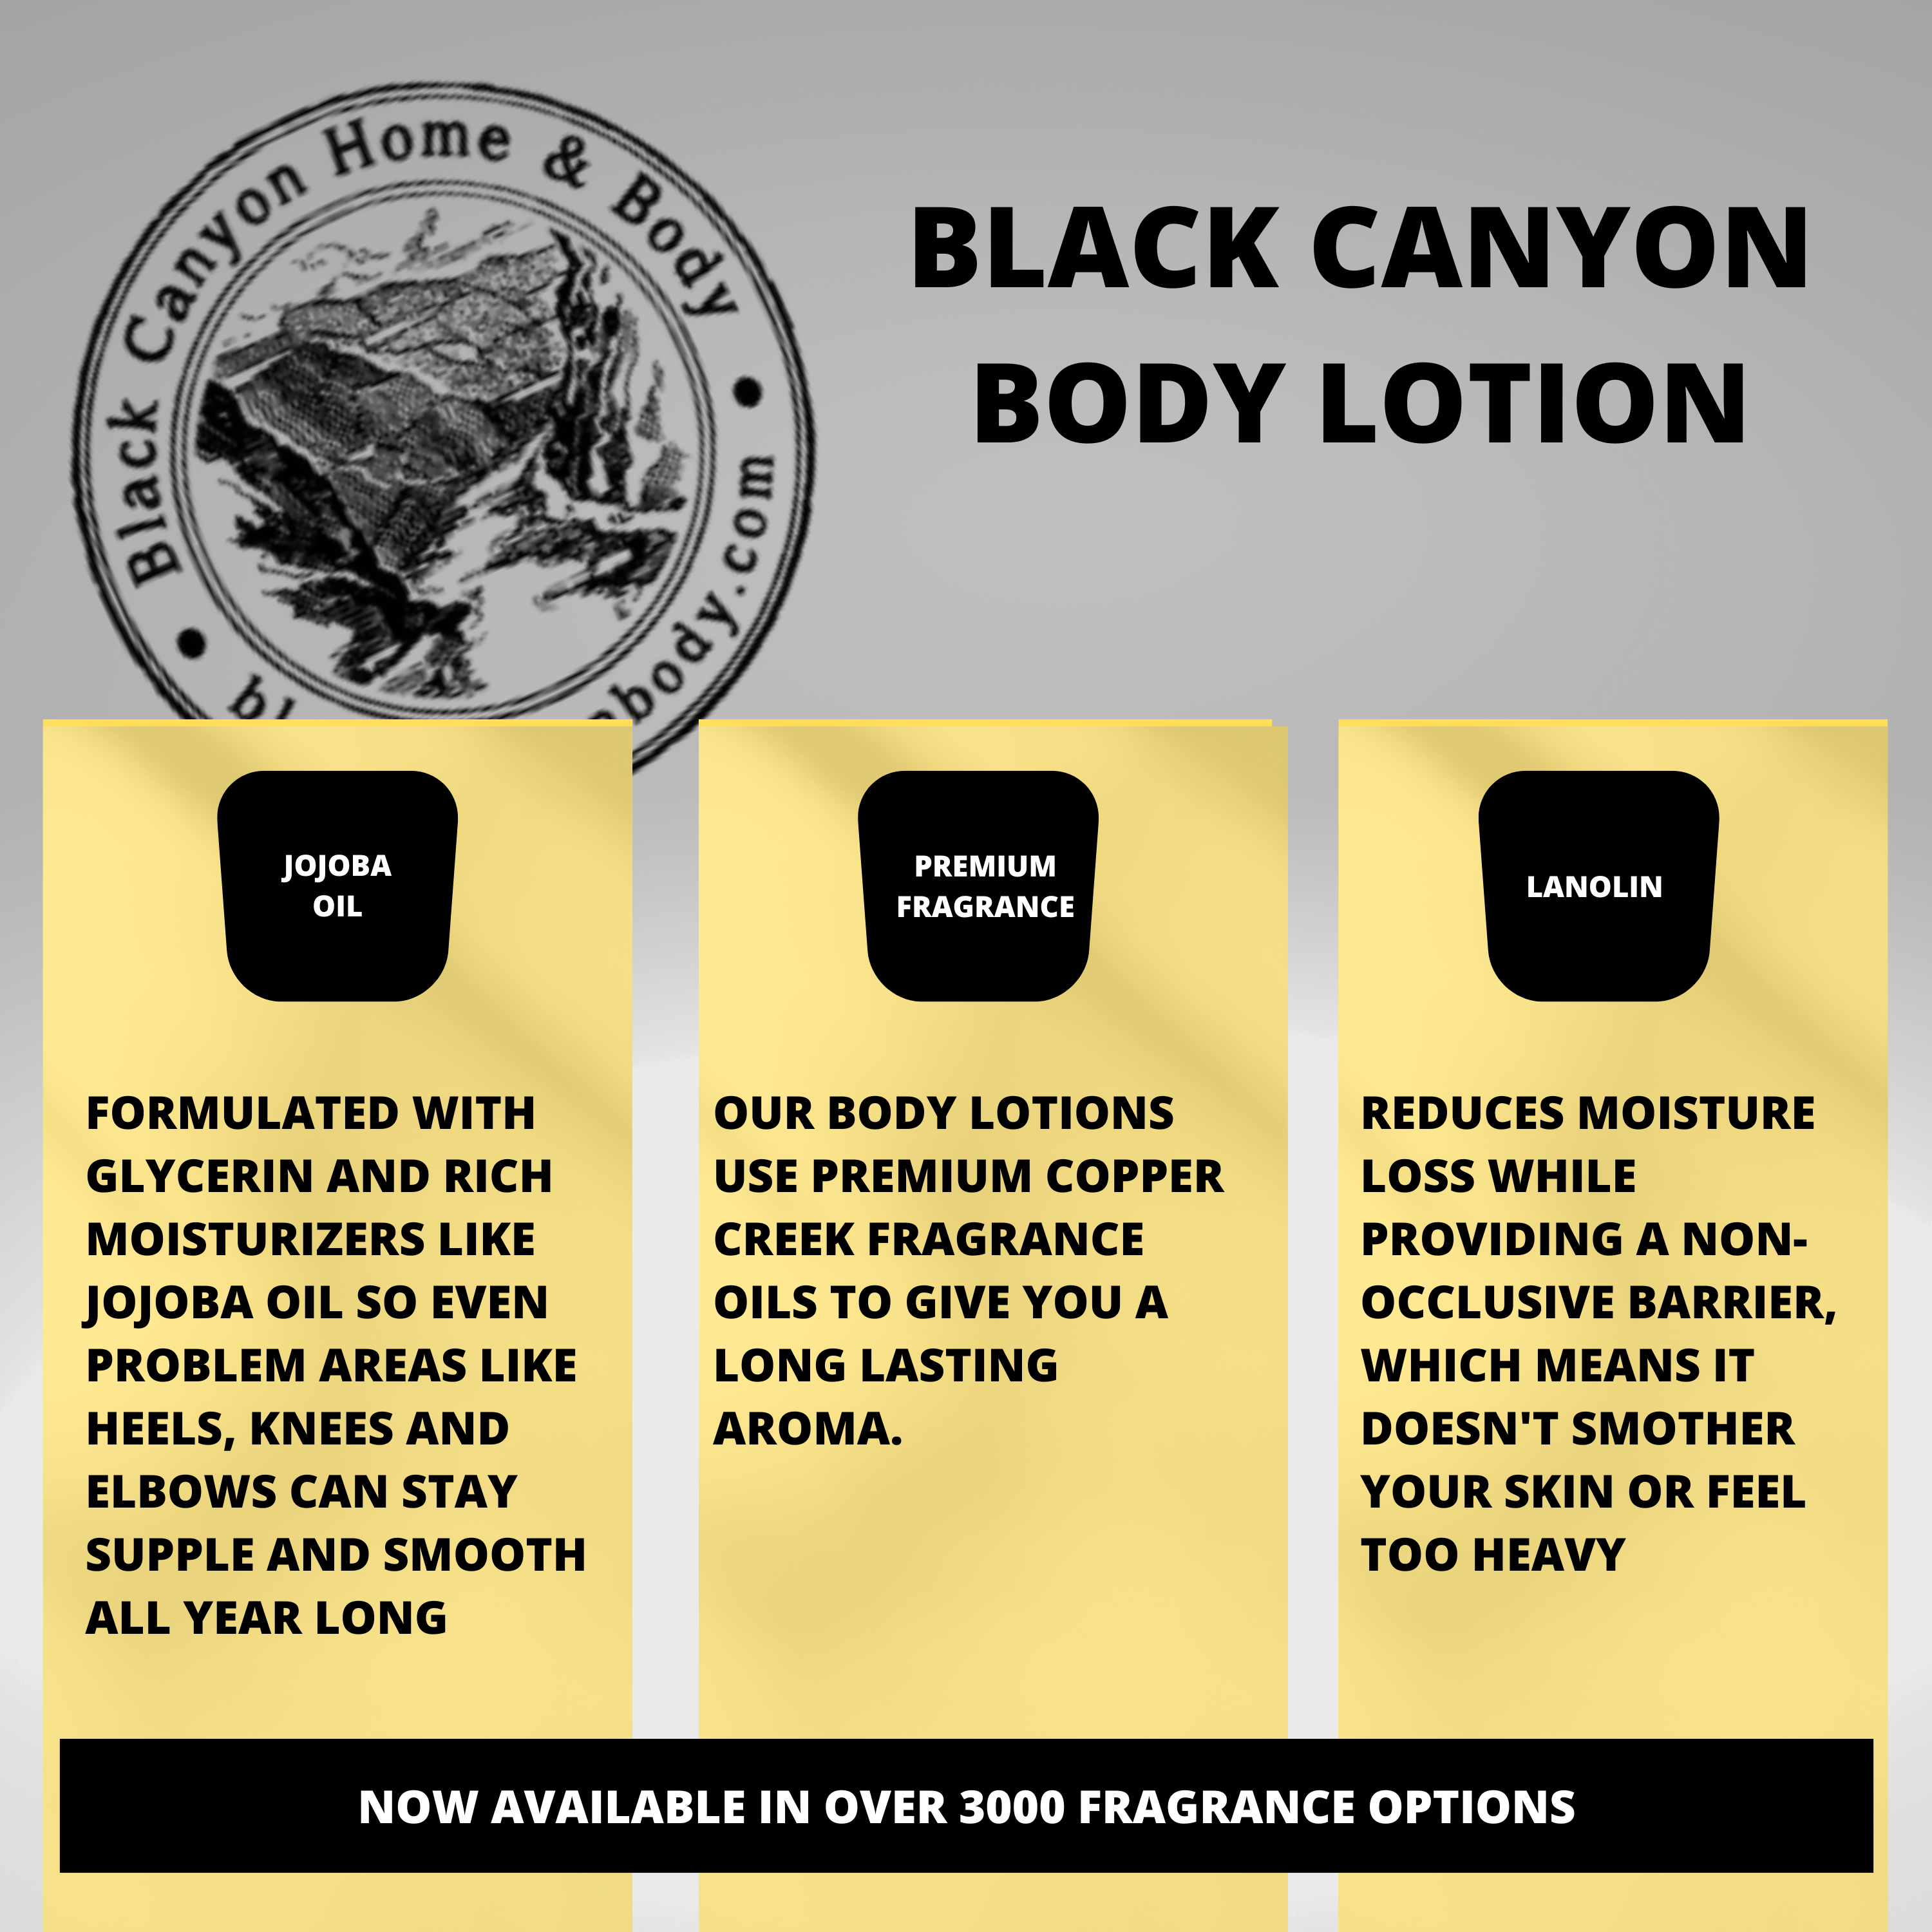 Black Canyon Raspberries & Cream Scented Luxury Body Lotion with Lanolin and Jojoba Oil